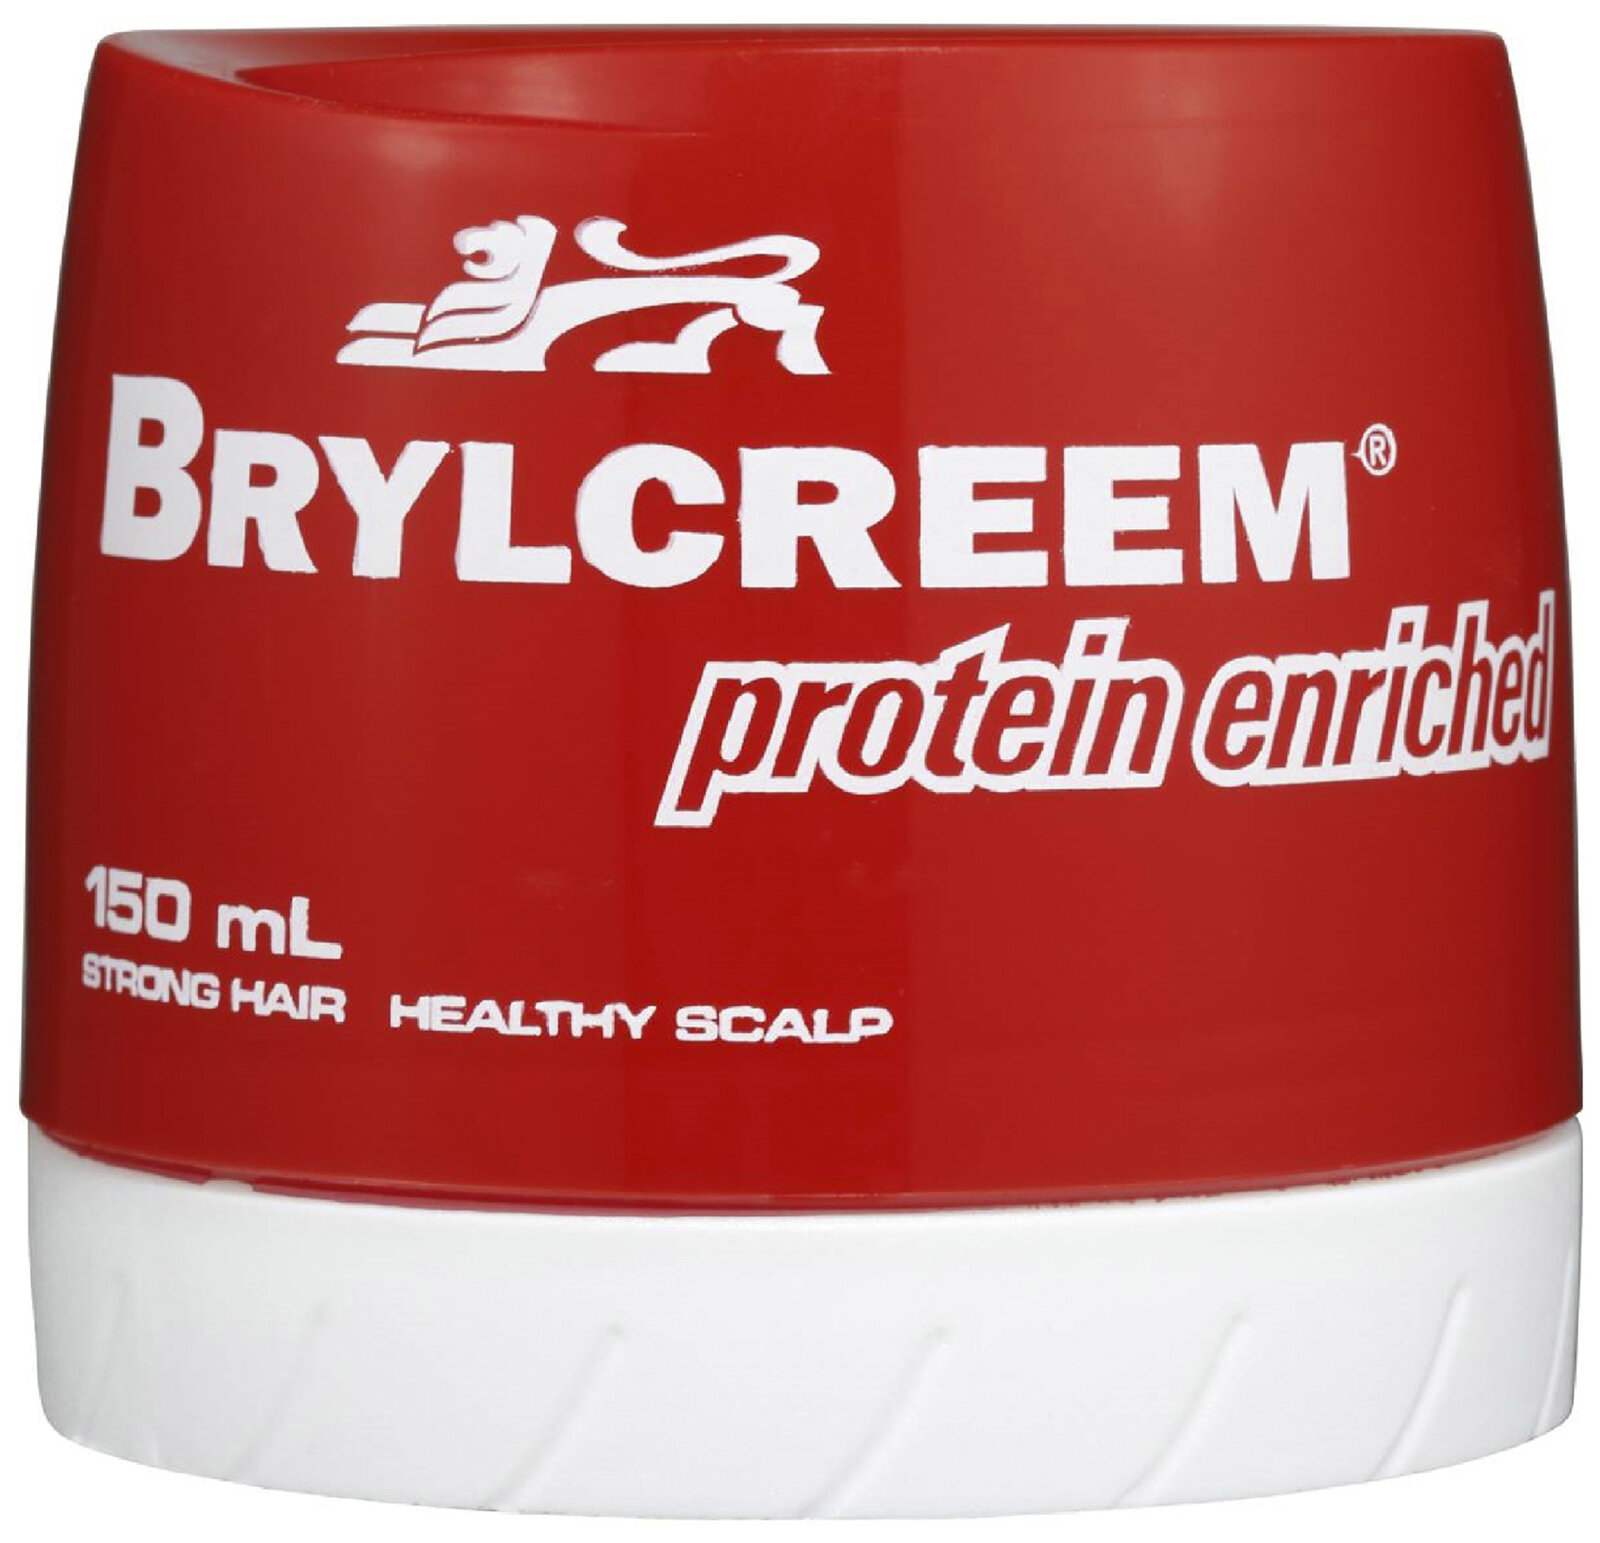 Brylcreem Hair Cream Protein Enriched 150ml - Oberon Pharmacy